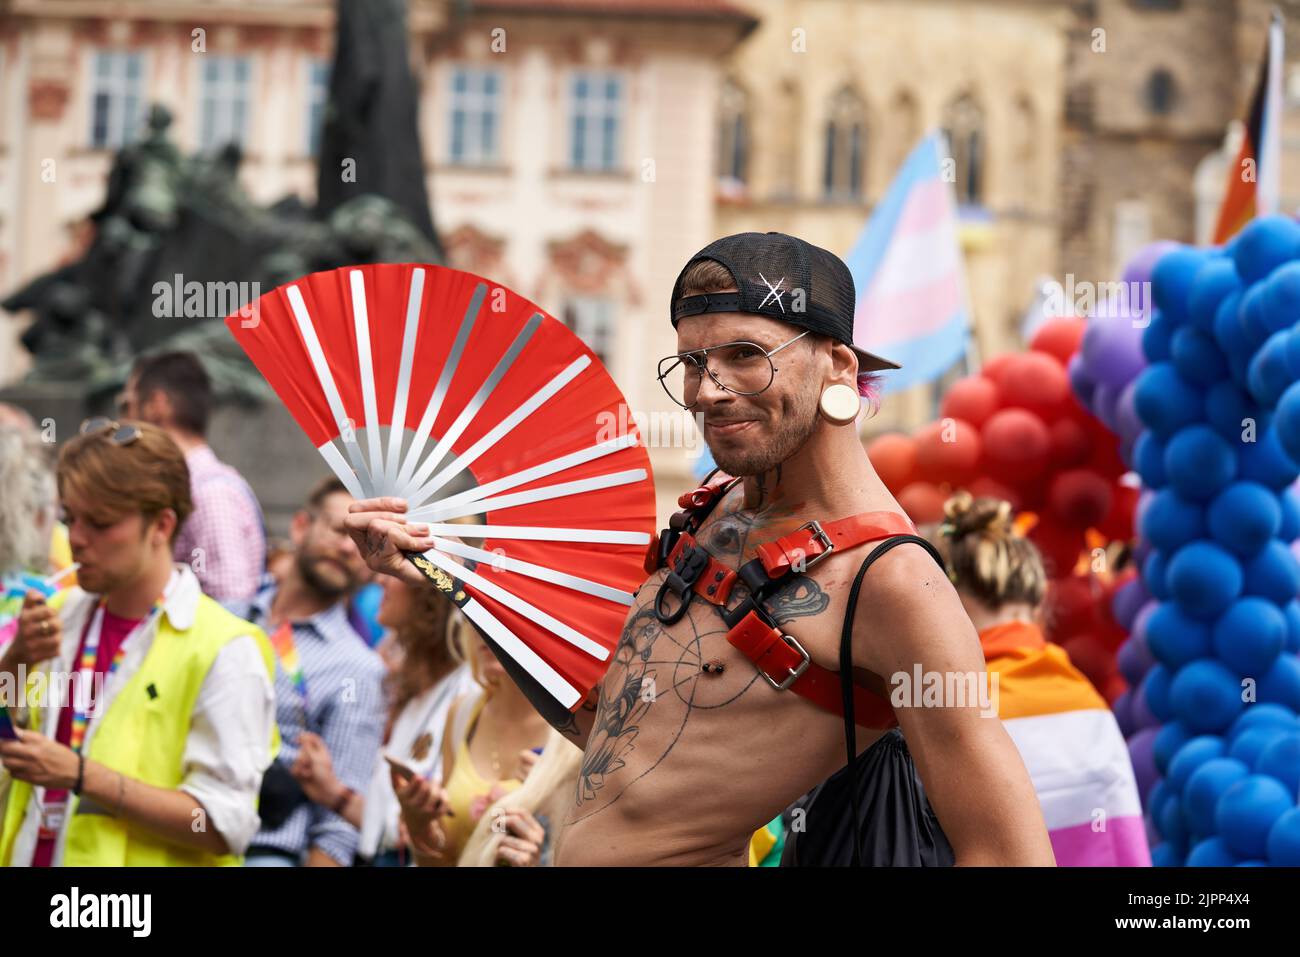 PRAGUE, CZECH REPUBLIC - AUGUST 13, 2022: Extravagant LGBT man with red fan posing at the Old Town Square during gay pride Stock Photo